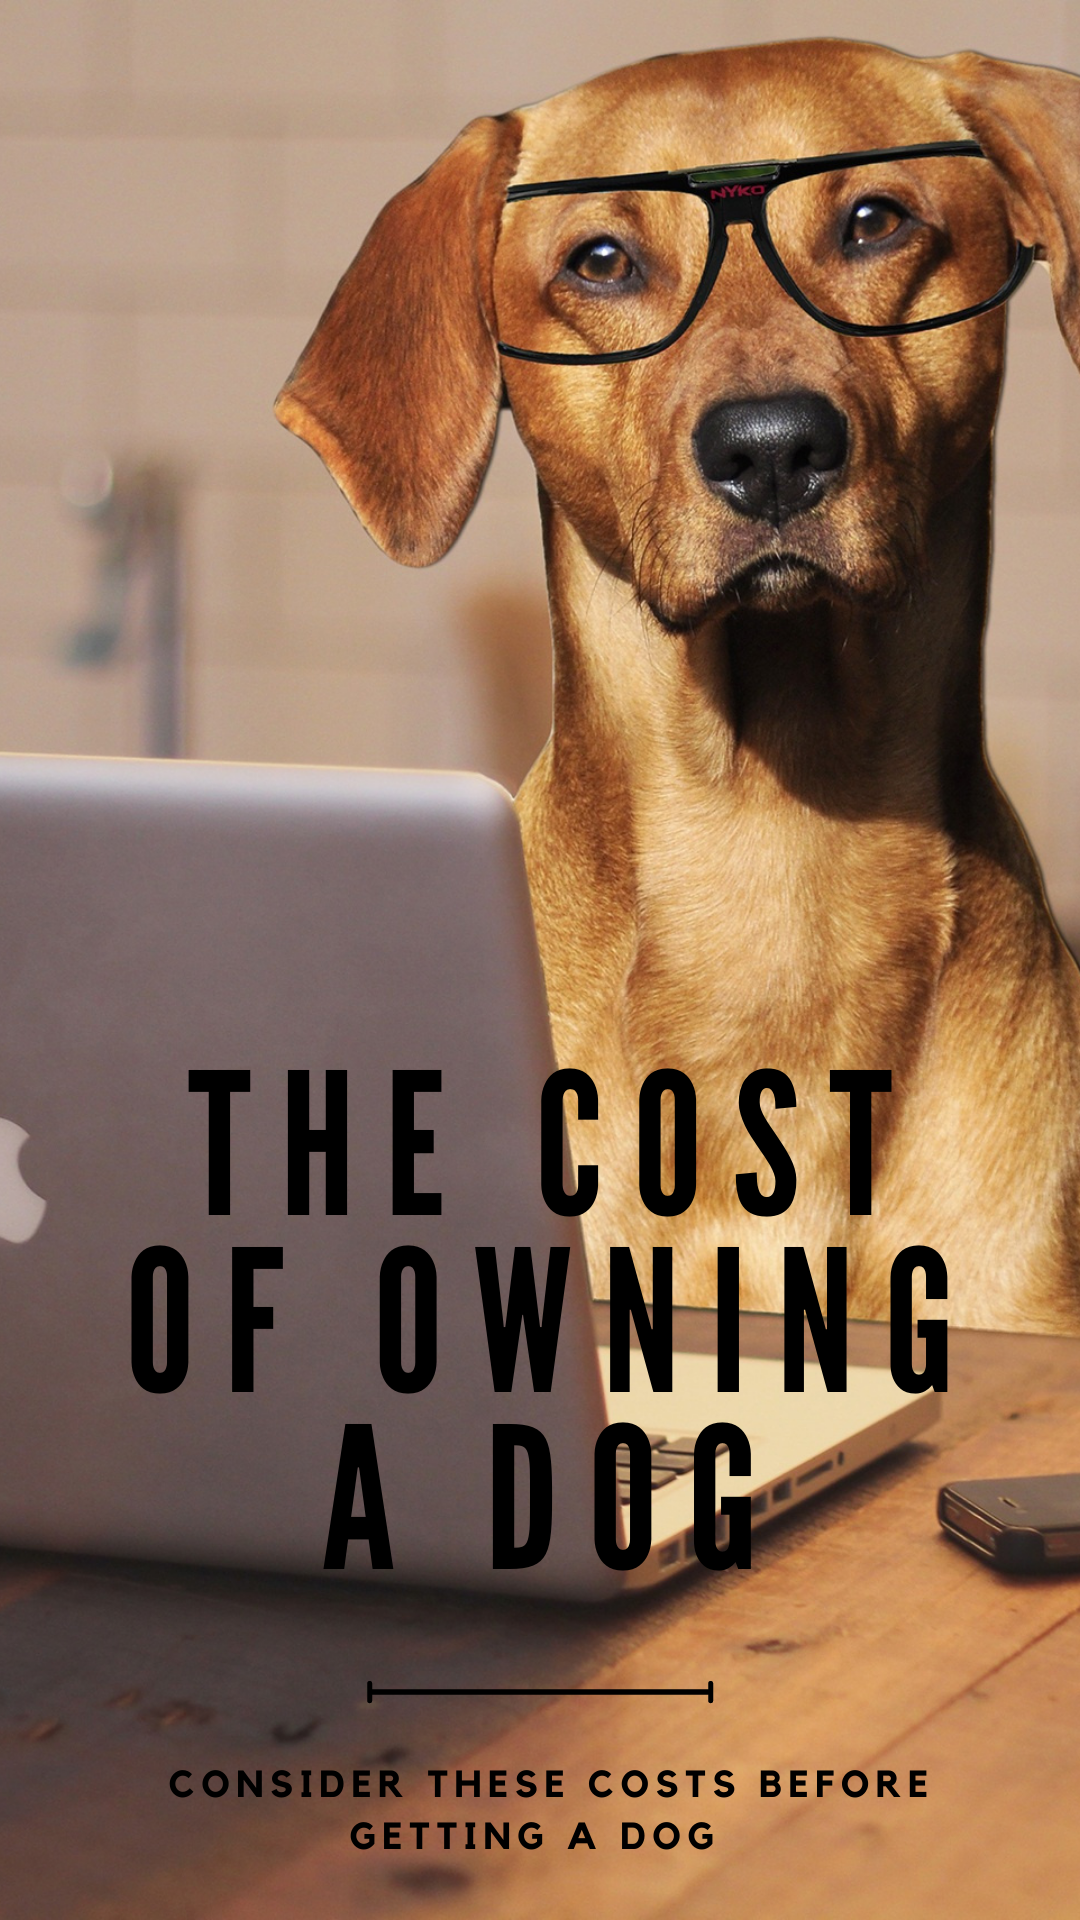 Costs to Consider Before Owning a Dog